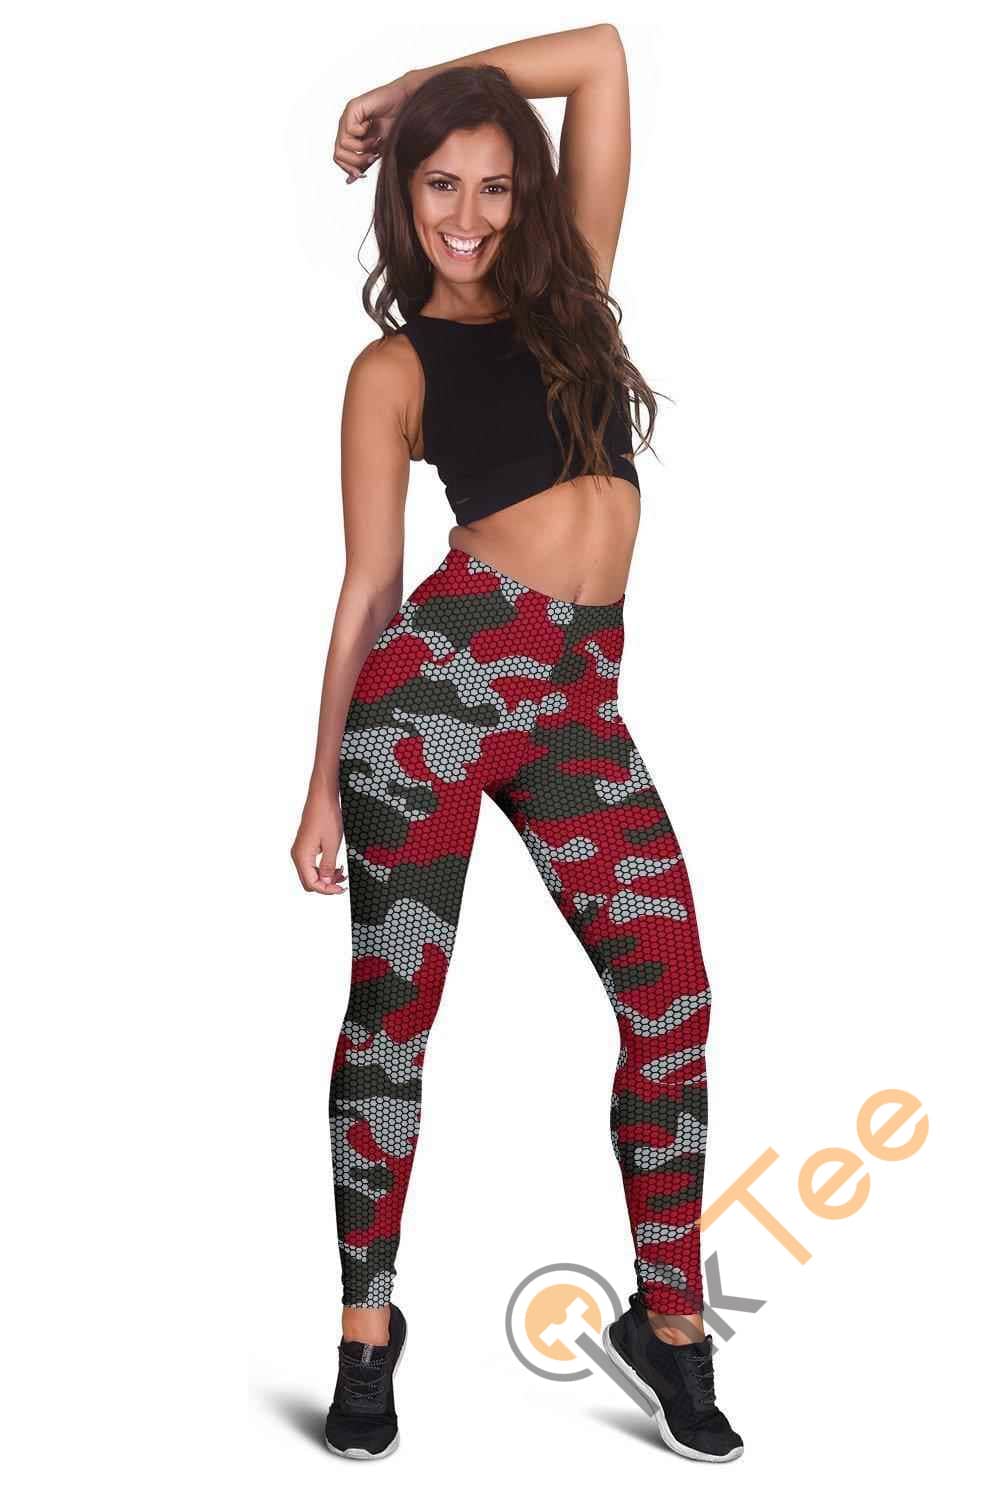 Inktee Store - Tampa Bay Buccaneers Inspired Hex Camo 3D All Over Print For Yoga Fitness Fashion Women'S Leggings Image